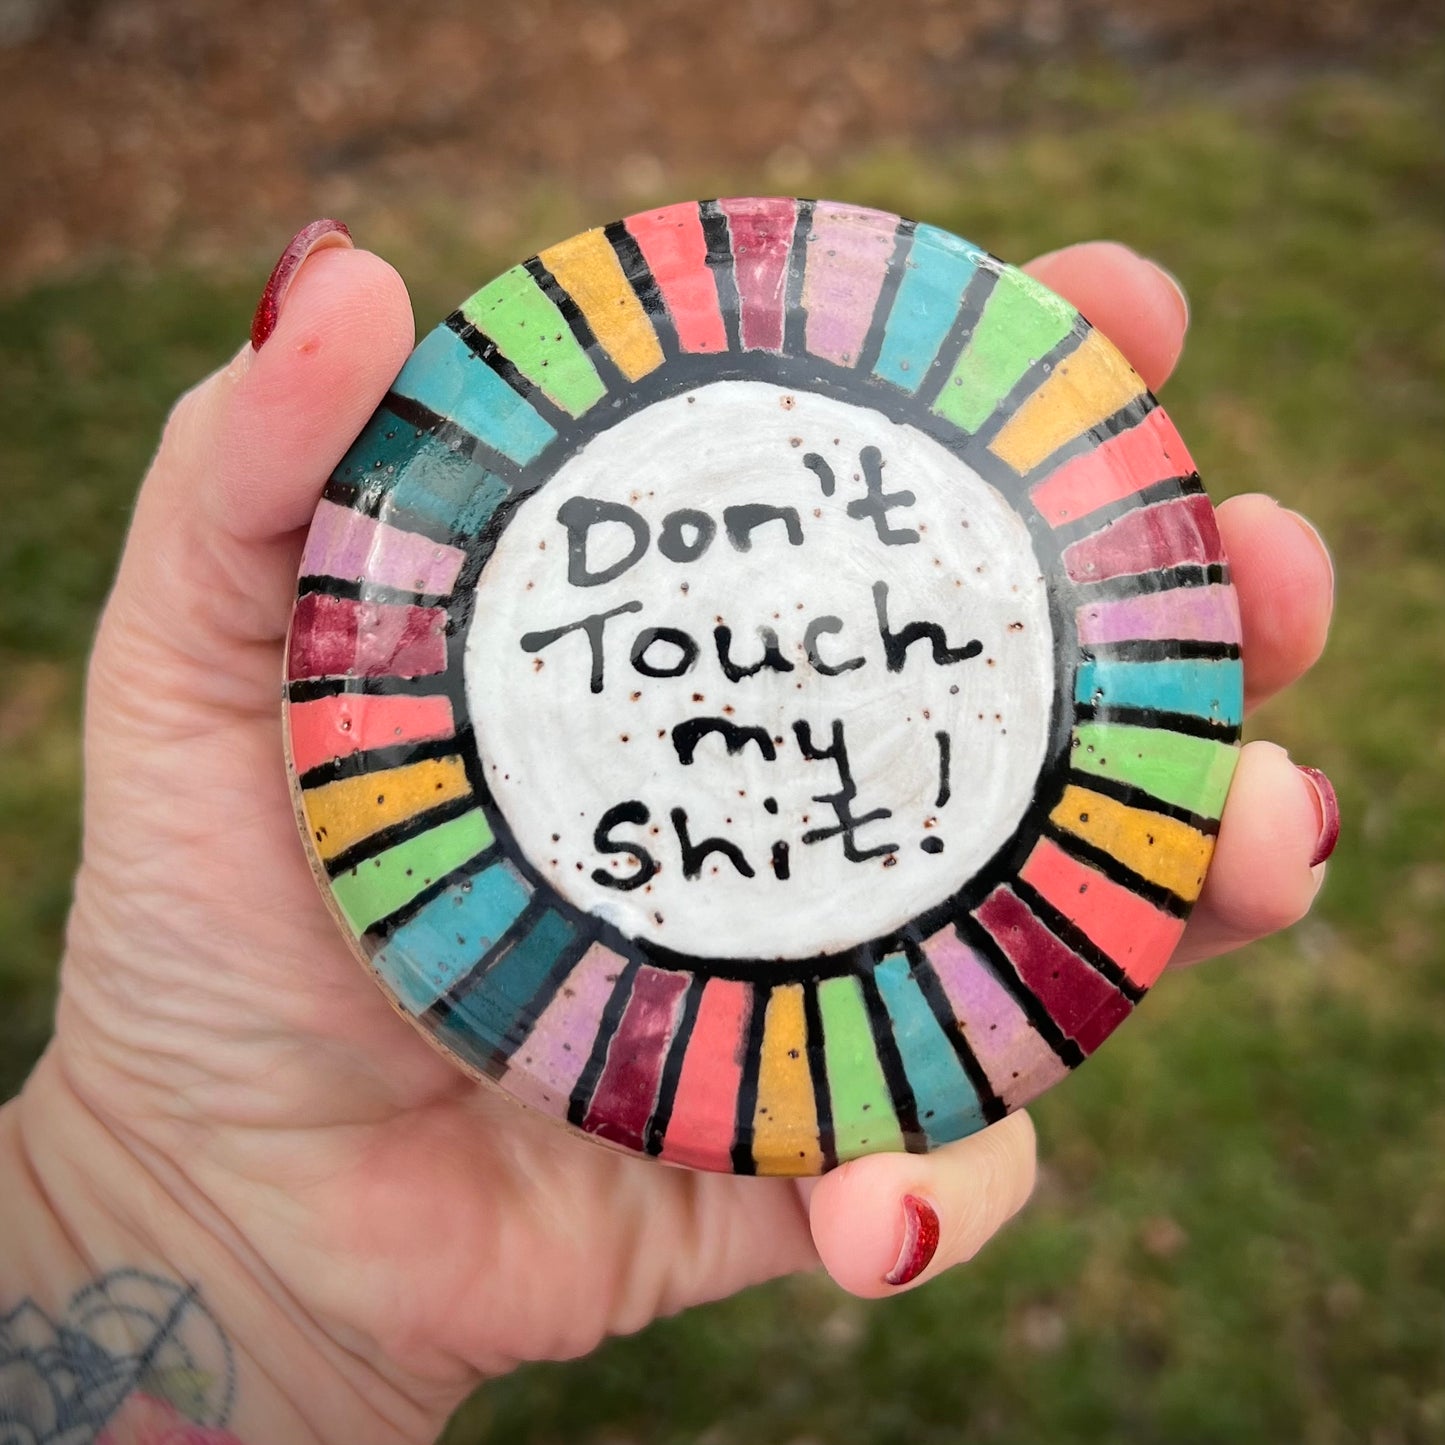 Don't Touch My Sh!t Ceramic lidded Dish